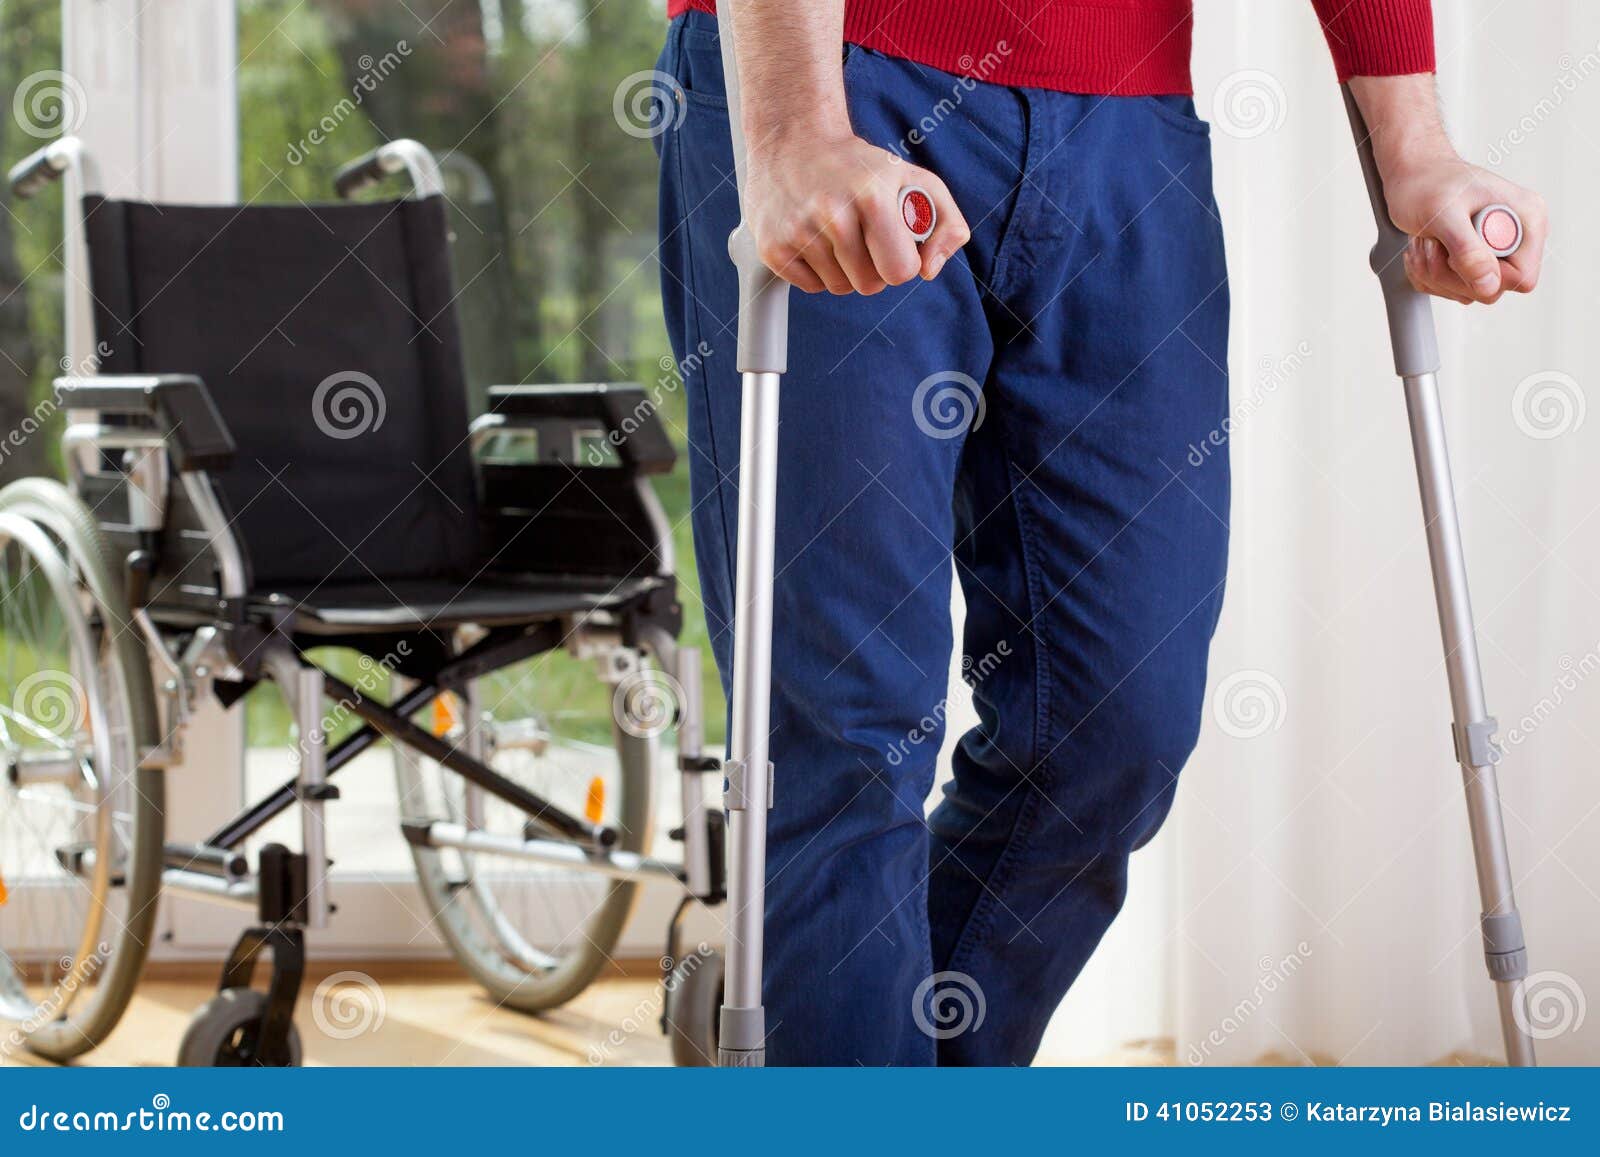 disabled man on crutches